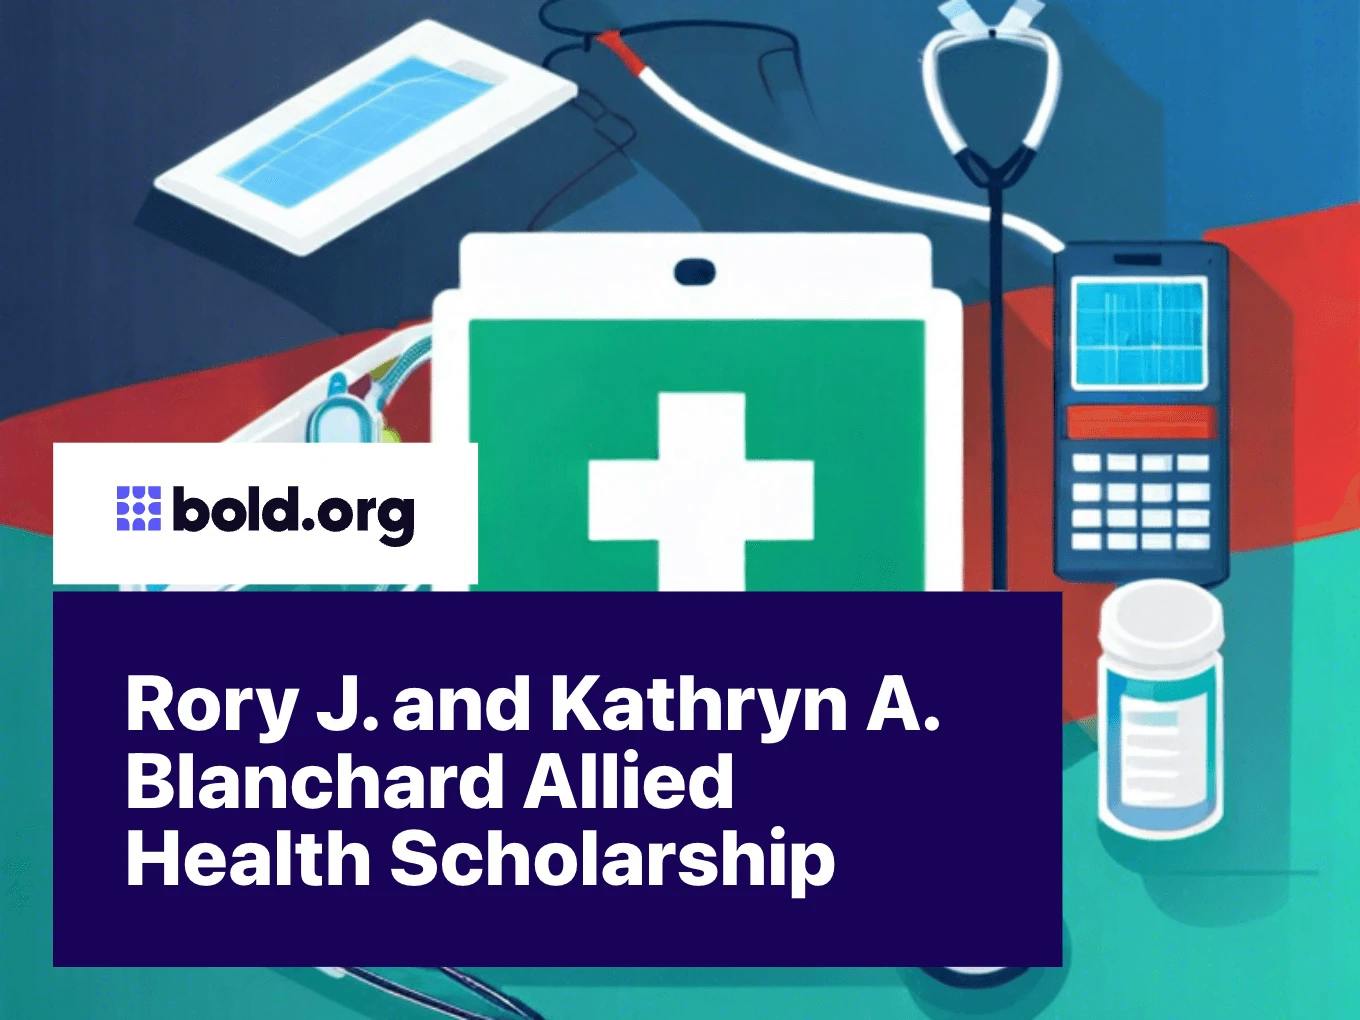 Rory J. and Kathryn A. Blanchard Allied Health Scholarship